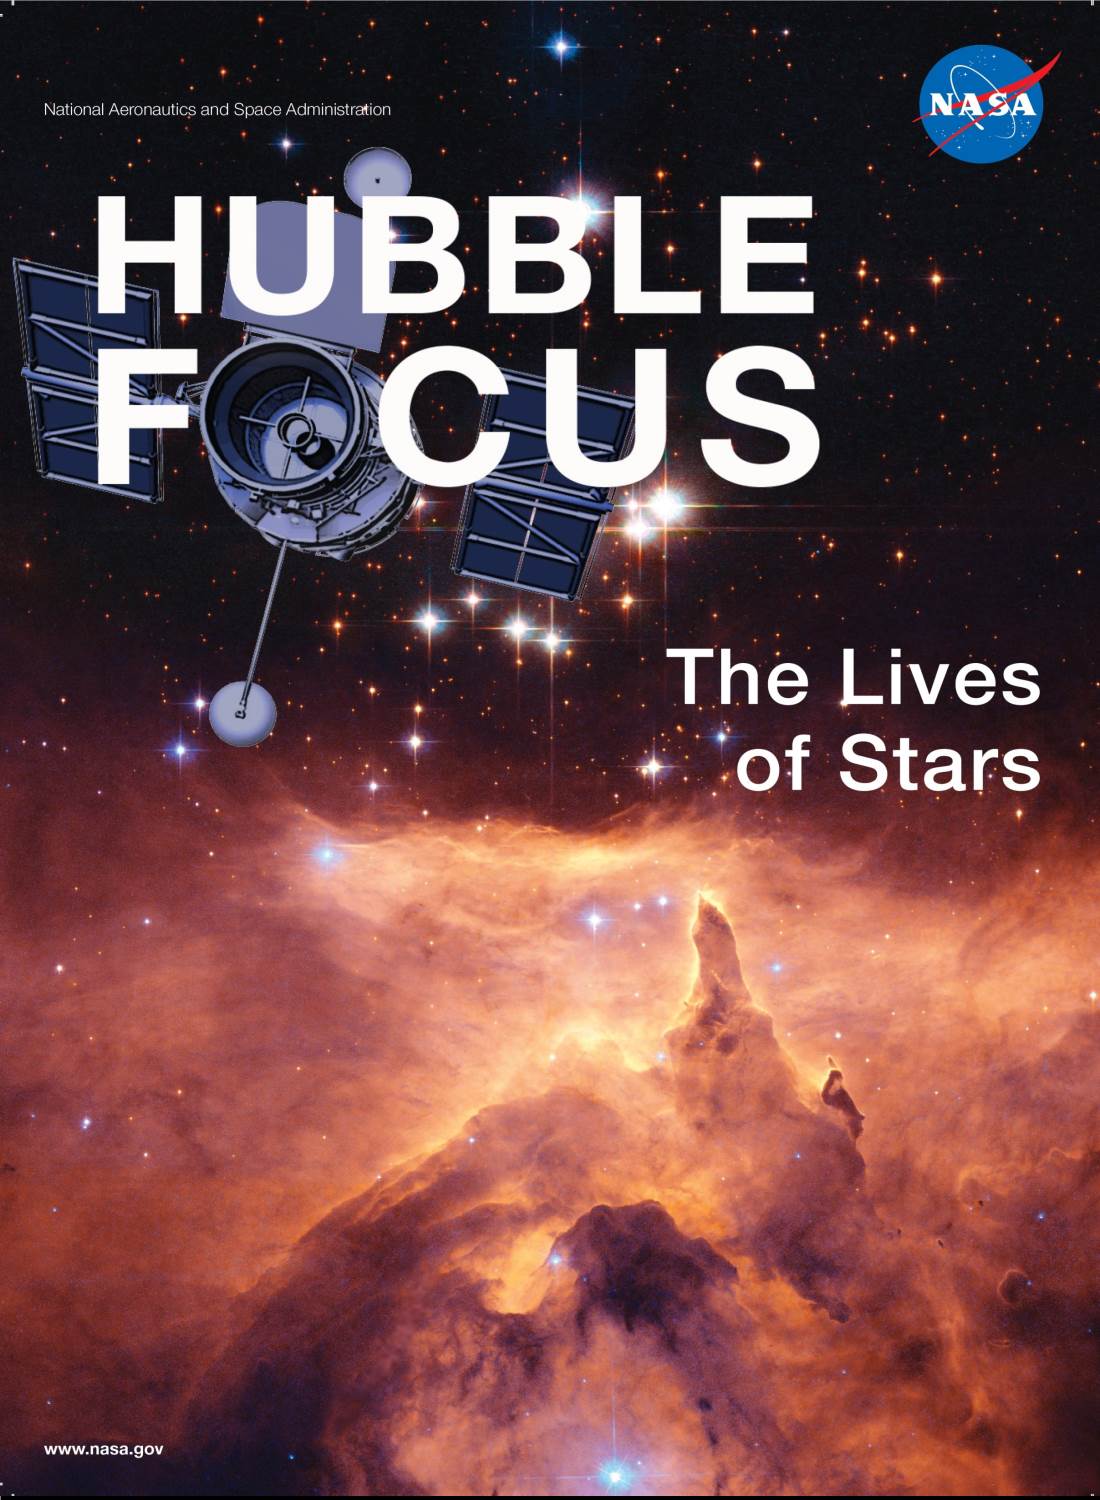 Hubble Focus: the Lives of Stars, Highlights Some of Hubble’S Recent Discoveries About the Birth, Evolution, and Death of Stars